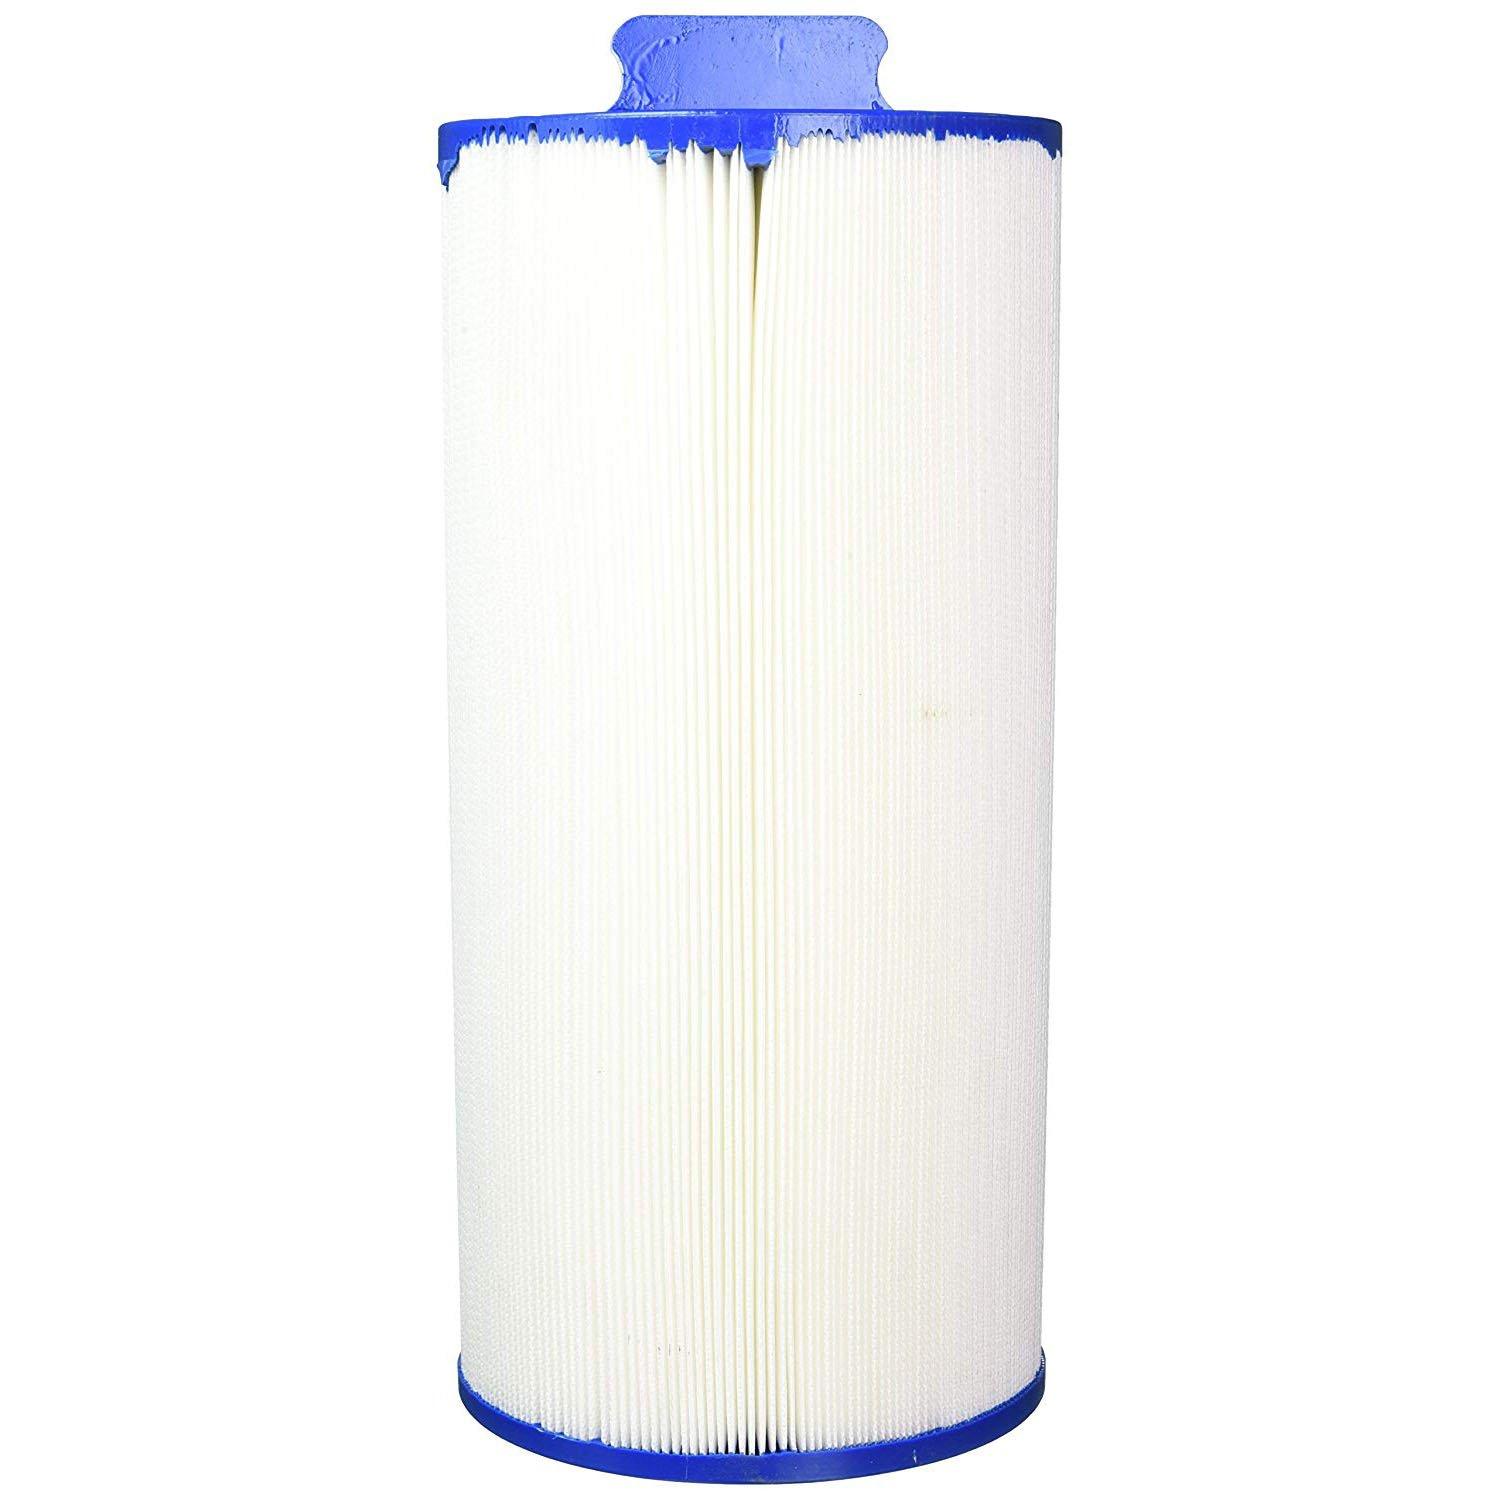 Filter Cartridge For Upgrade For Ptl50xw-p, Pvt50p